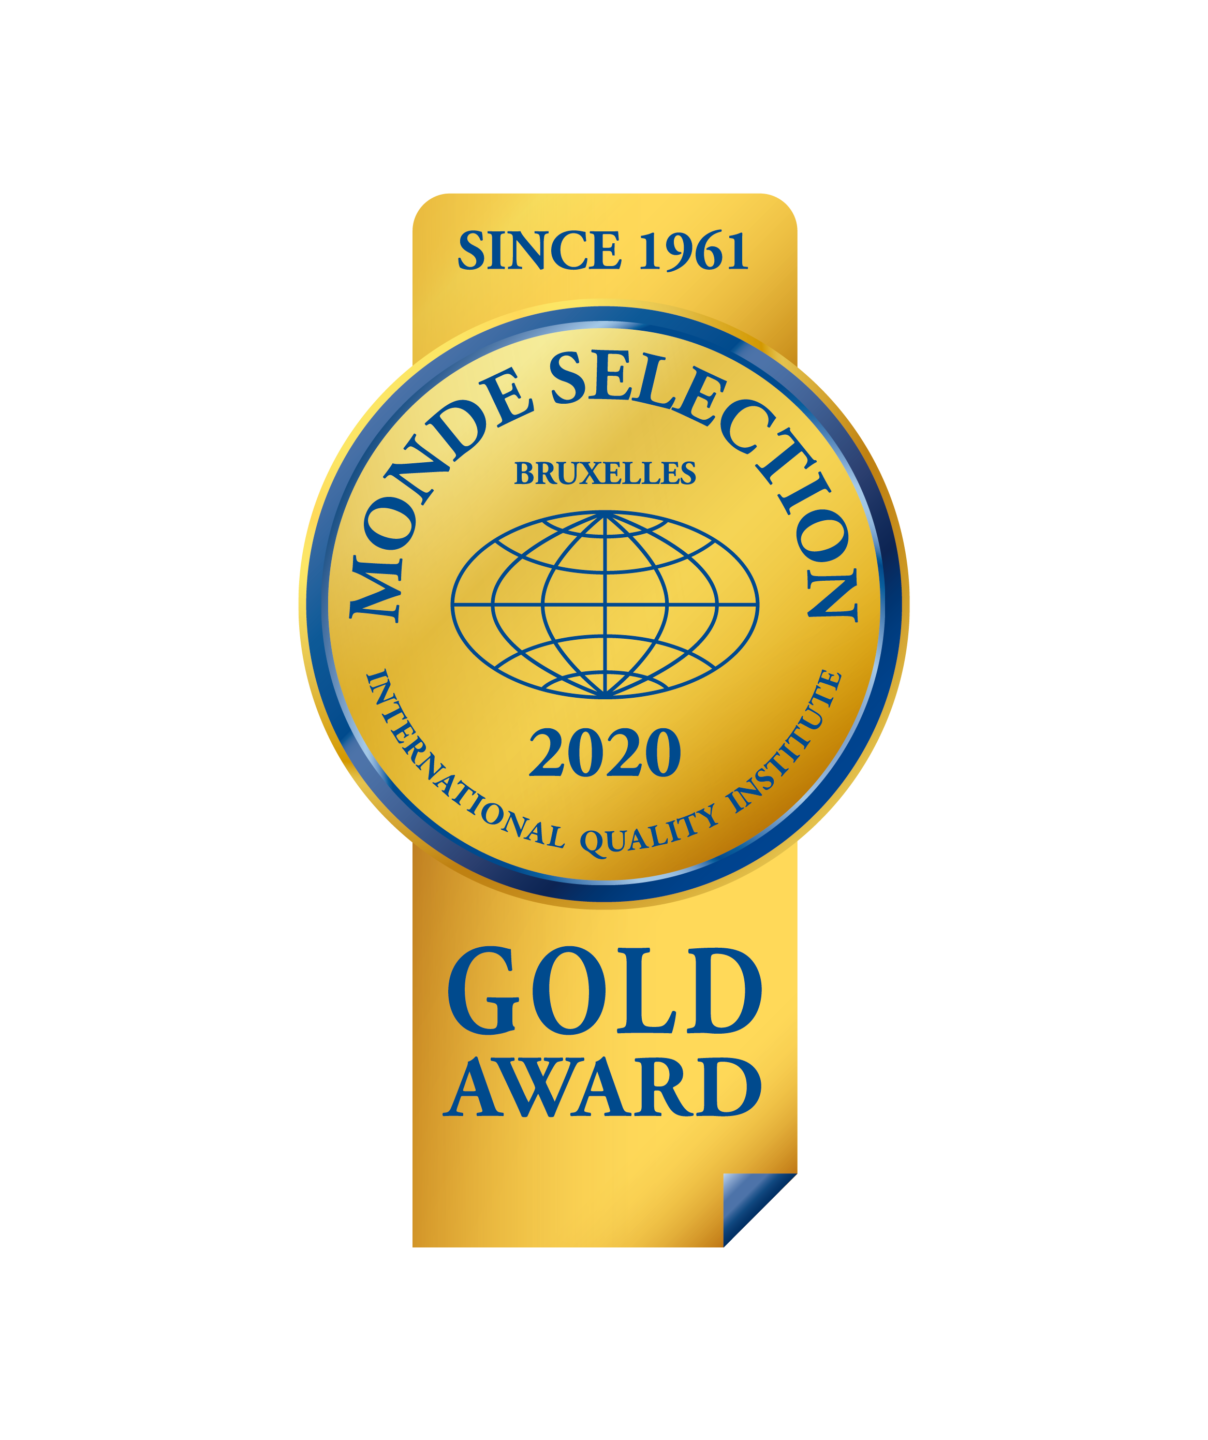 Eau Vive (Bottle 1,5L) - Grand Gold Quality Award 2021 from Monde Selection